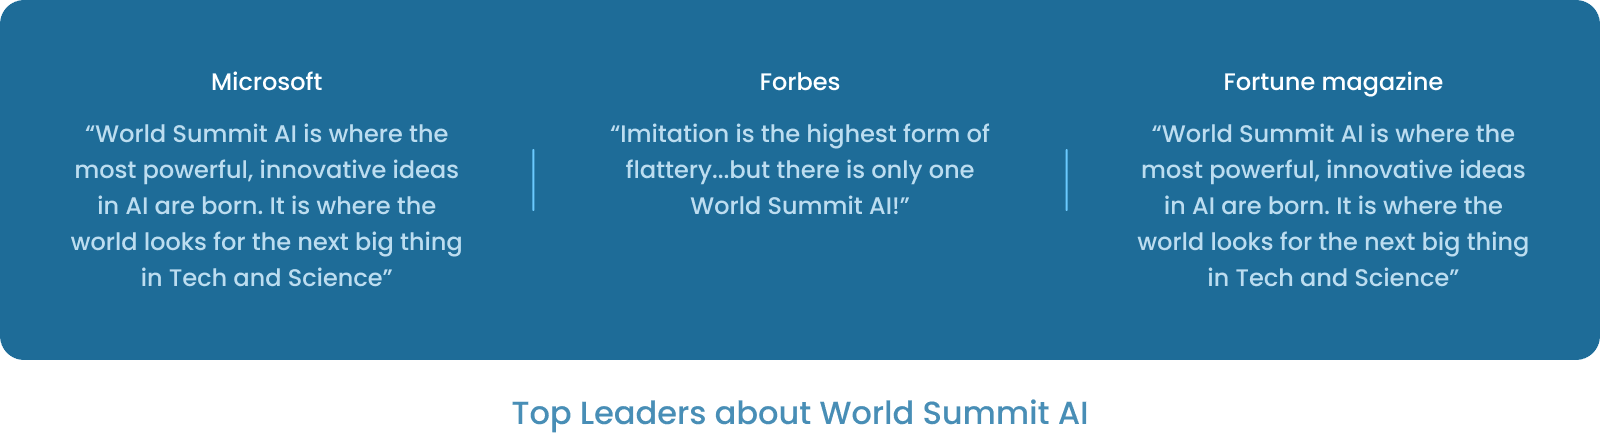 Top Leaders about World Summit AI